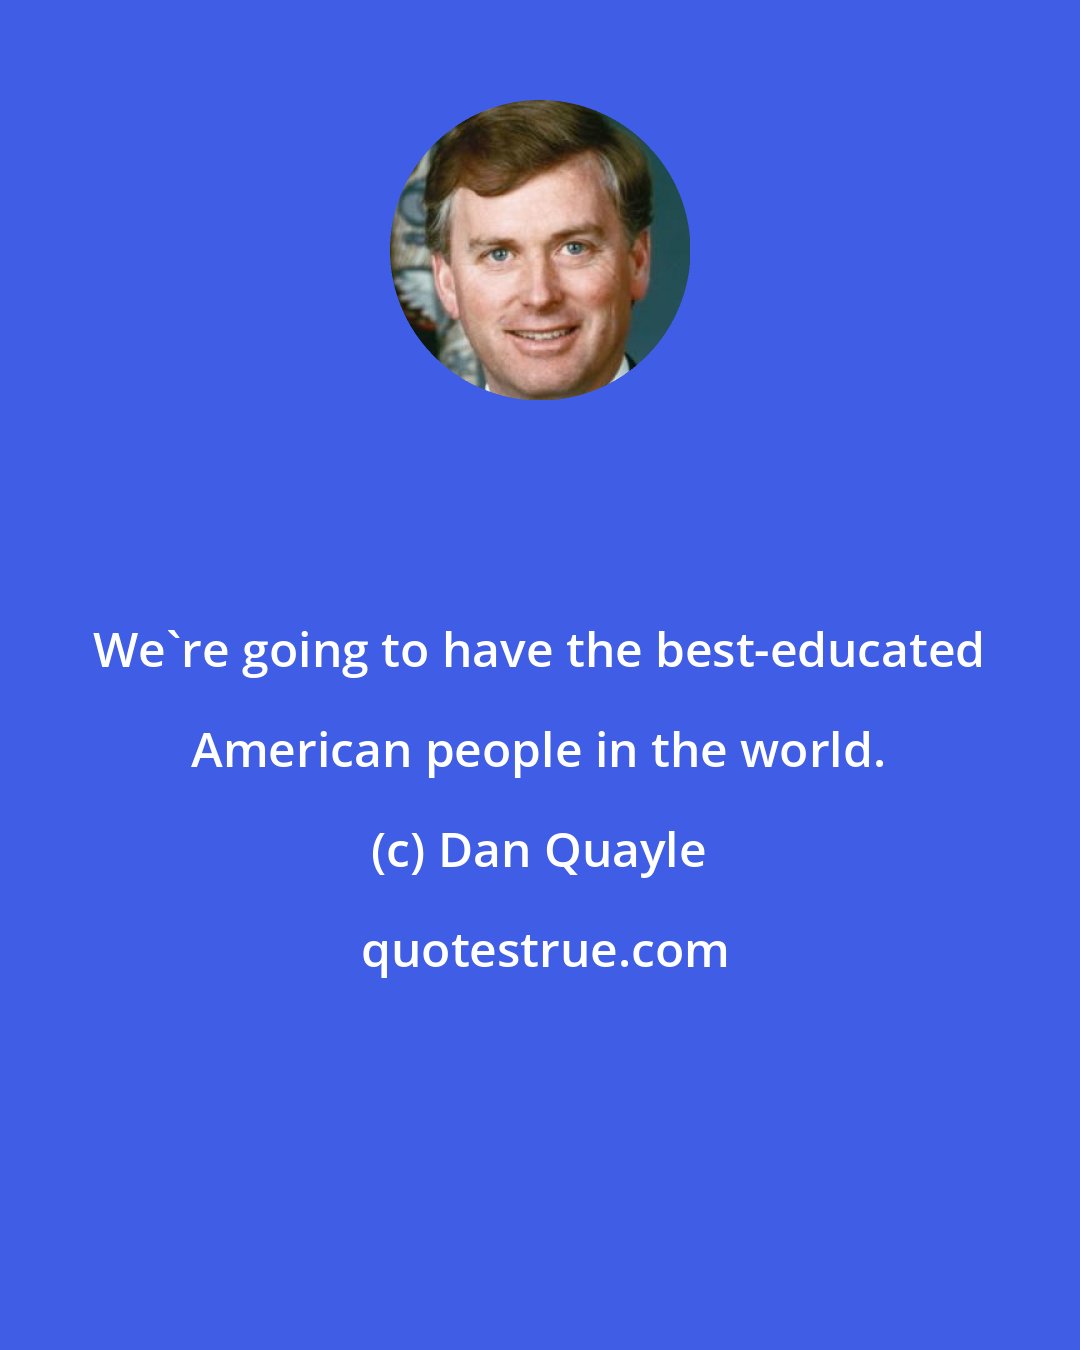 Dan Quayle: We're going to have the best-educated American people in the world.